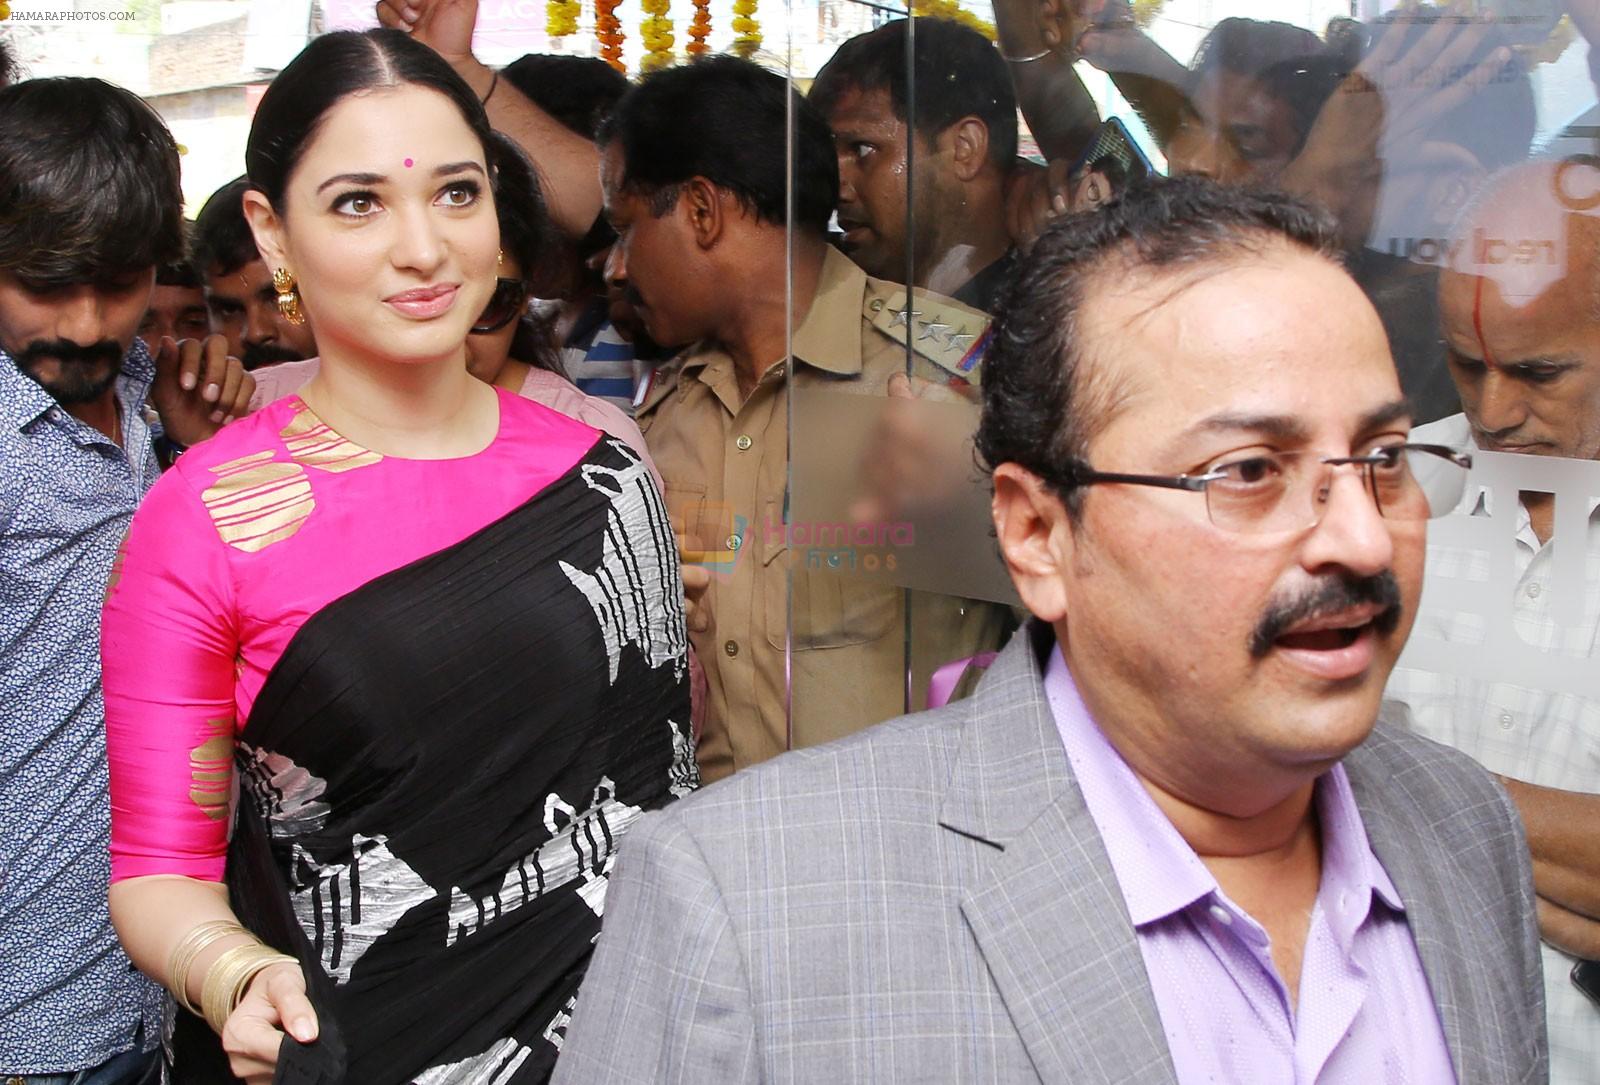 Tamannaah at the launch of B New Mobile Store in Proddatu on 5th May 2018